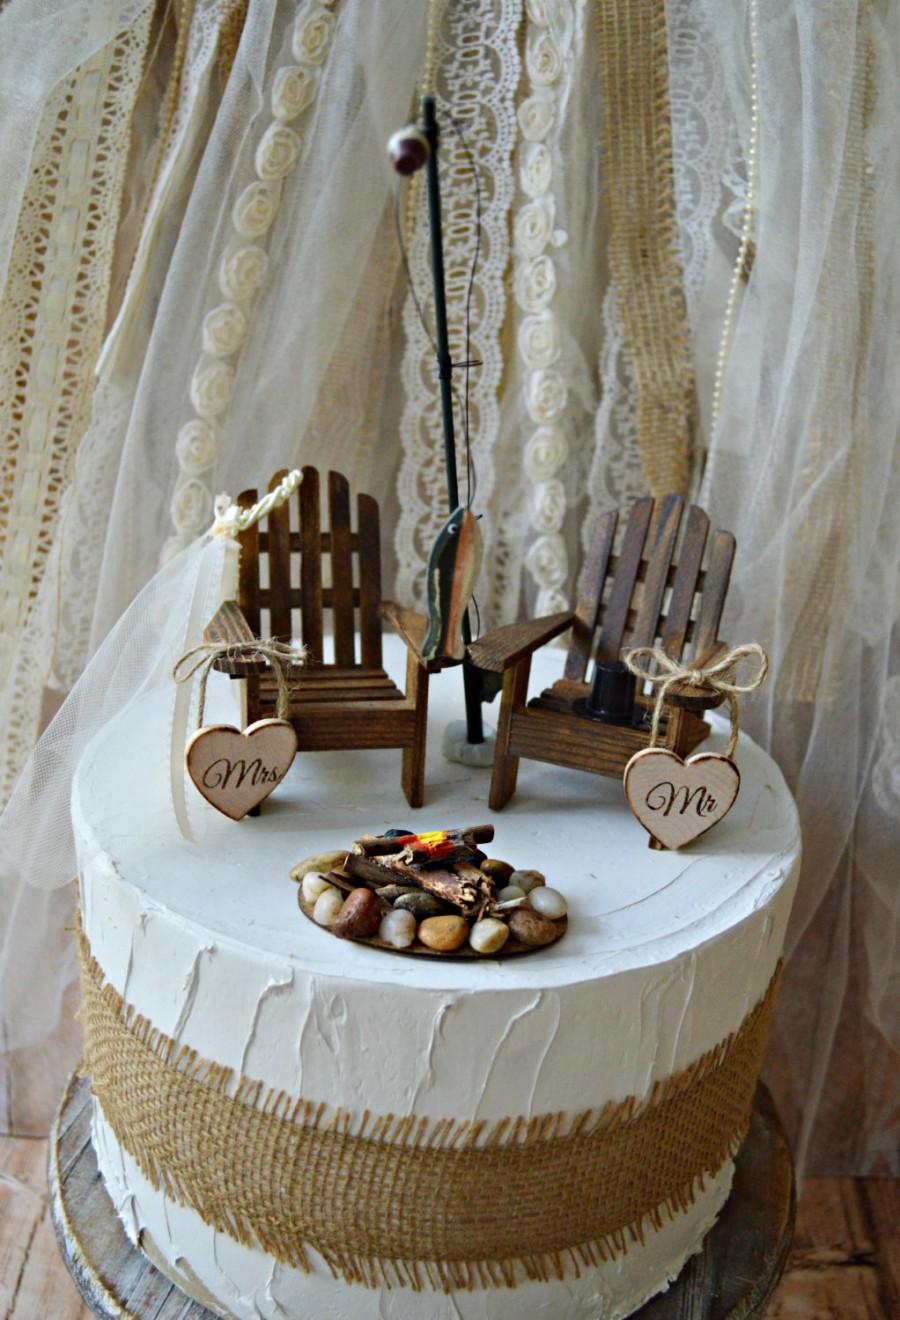 Wedding - hunting-camping-fishing-outdoors-wedding-cake topper-fishing groom-lake house-themed-wood chairs-bride and groom-camp fire-fishing pole